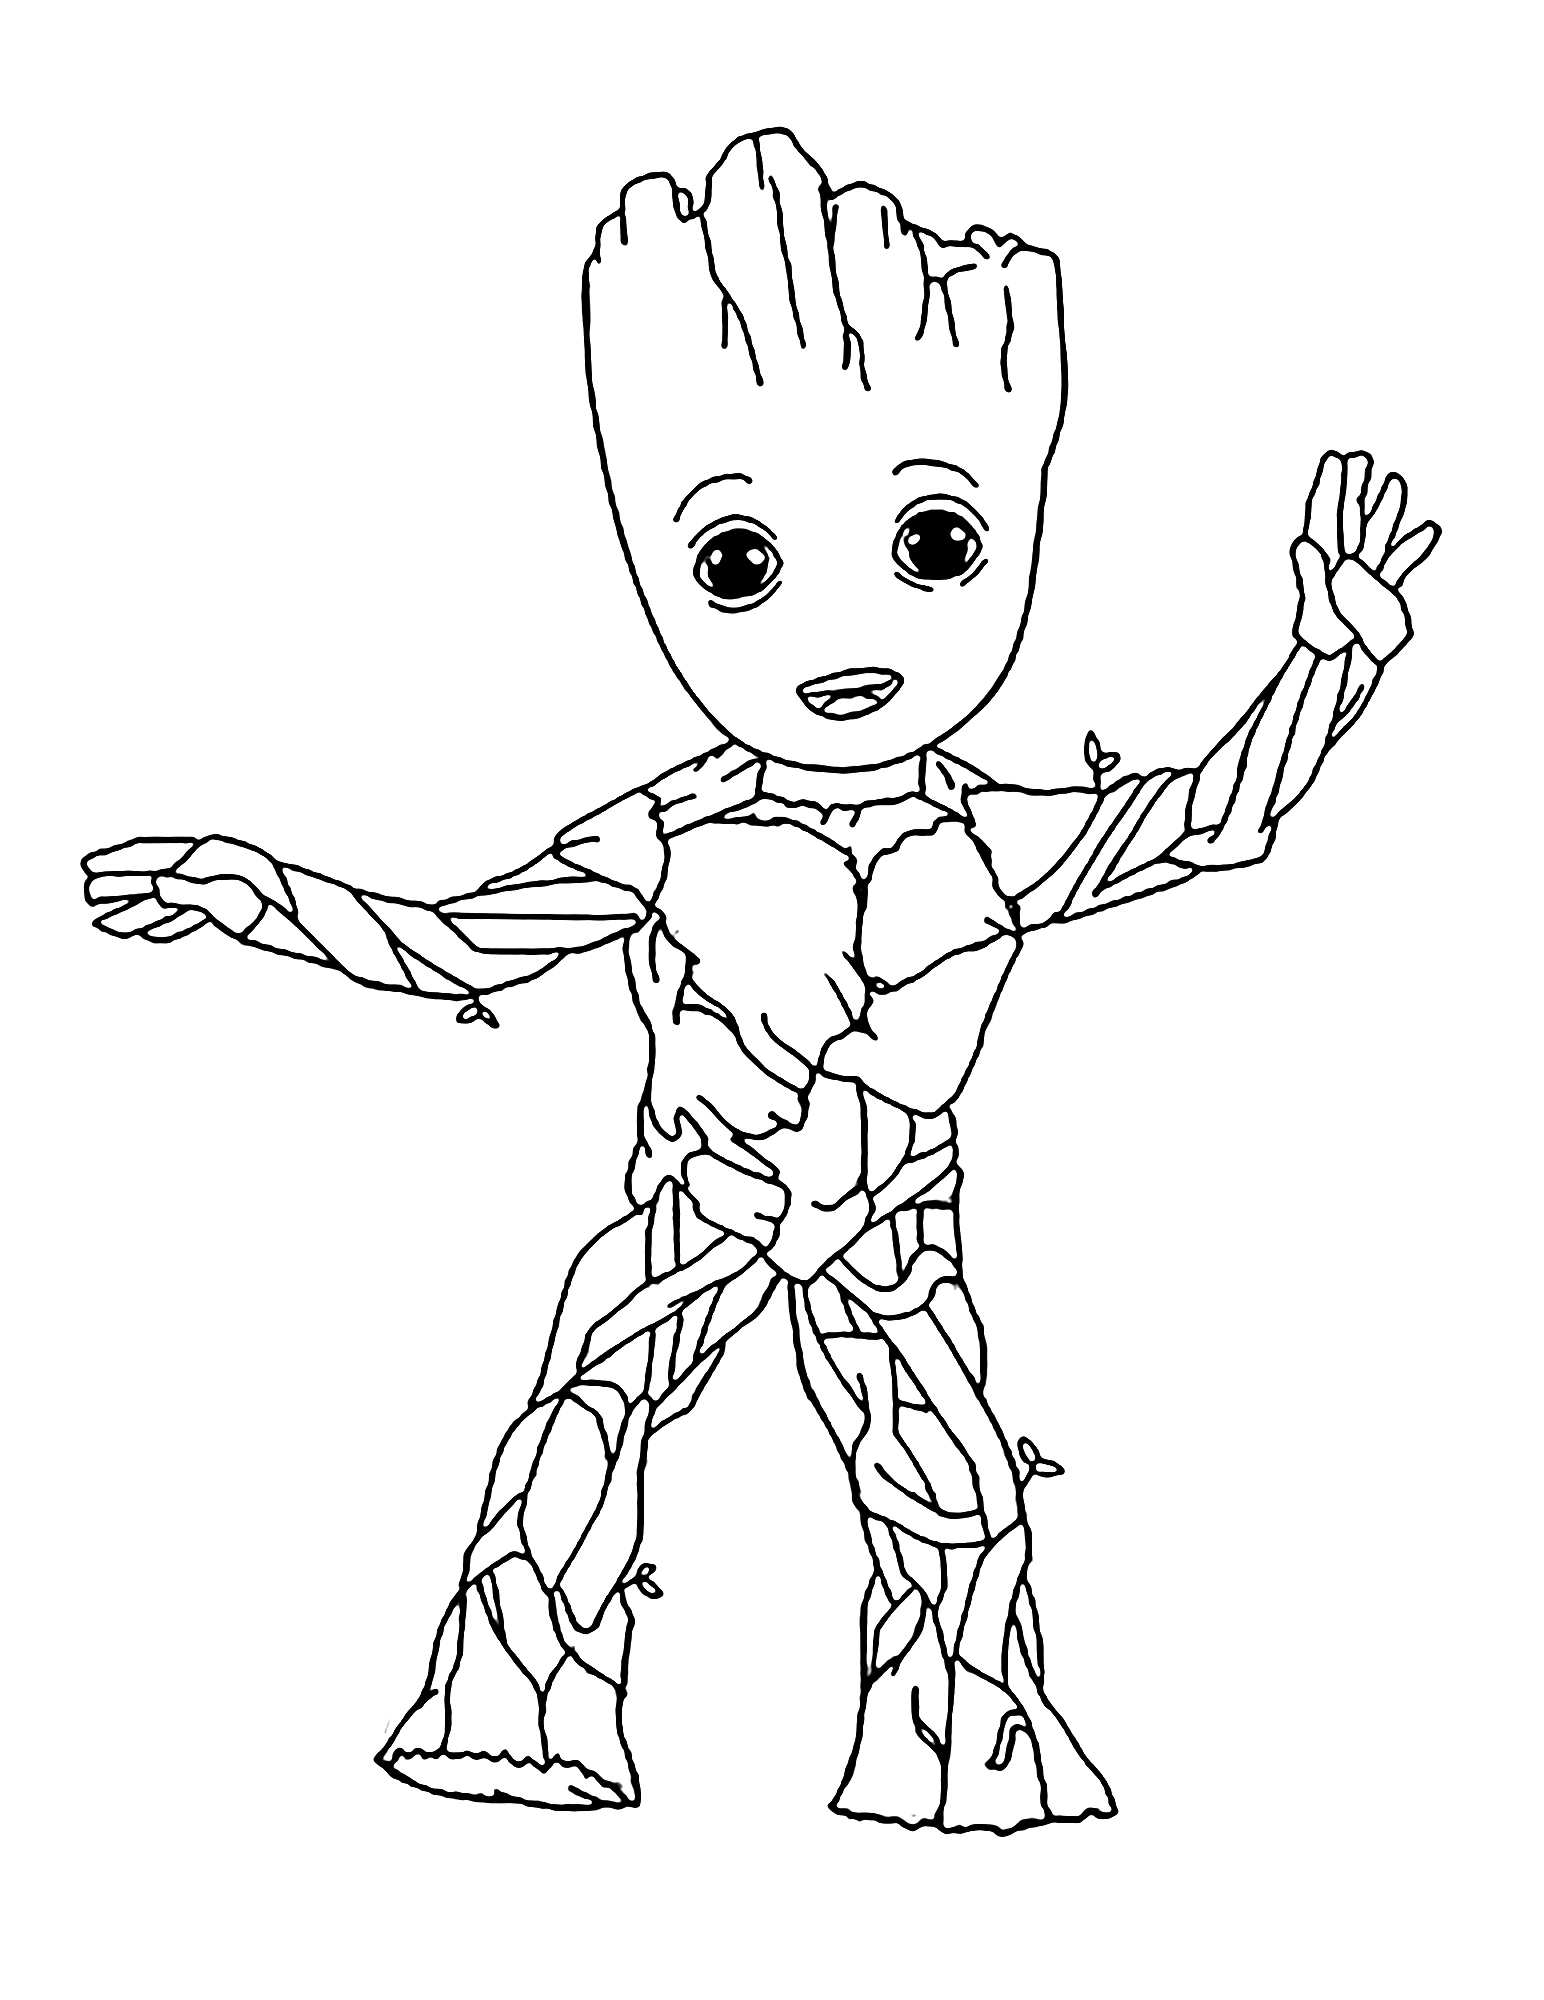 Simple Guardians of Galaxy coloring page to print and color for free : Little Groot